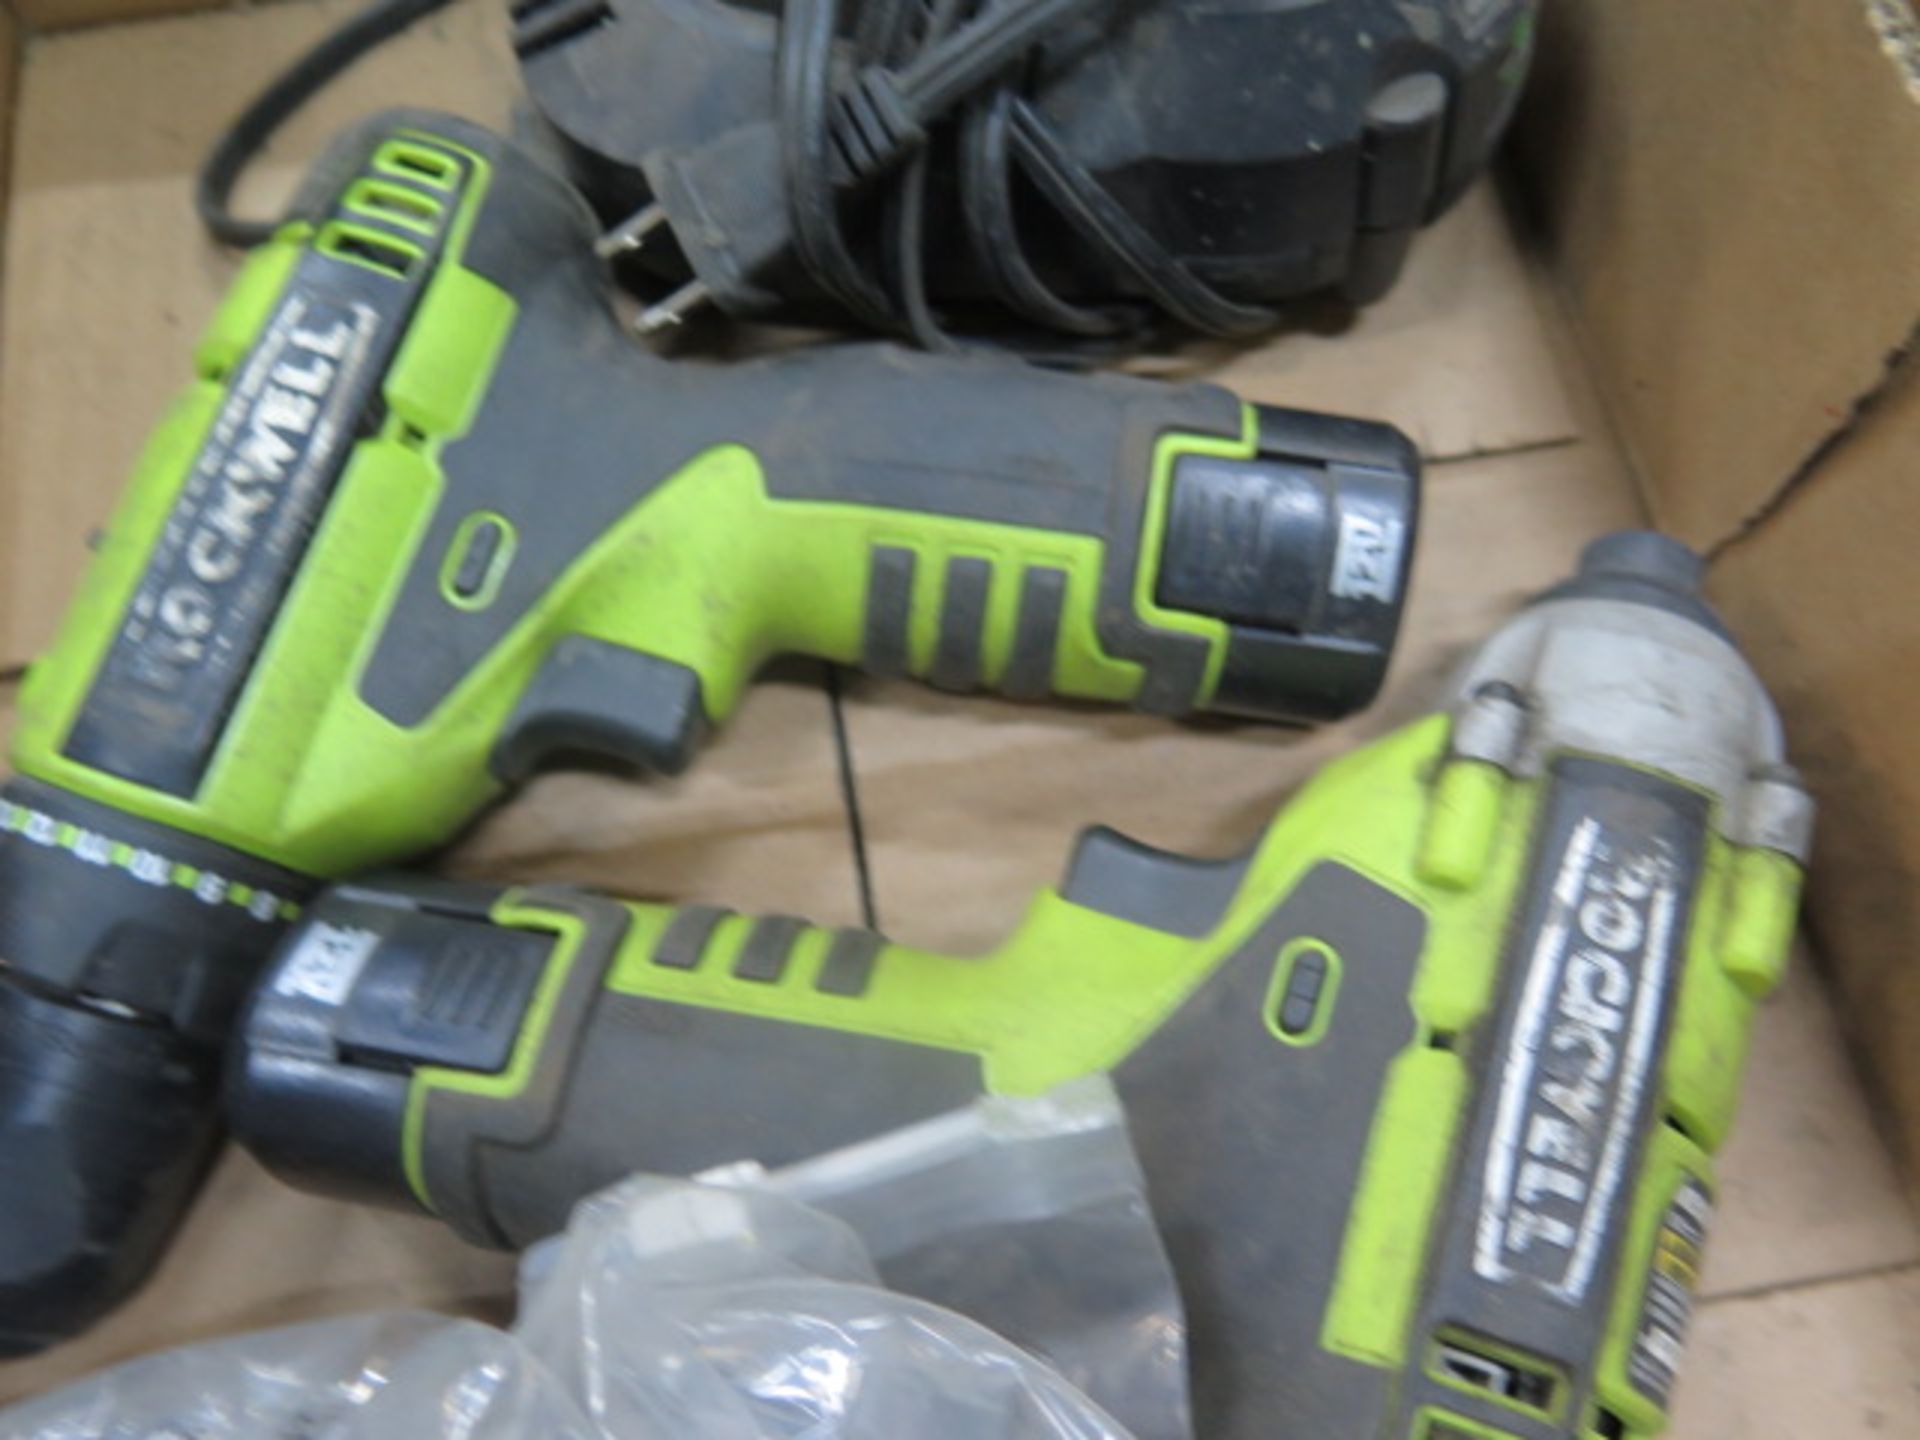 Rockwell Cordless Drill and Nut Driver w/ Charger (SOLD AS-IS - NO WARRANTY) - Image 4 of 6